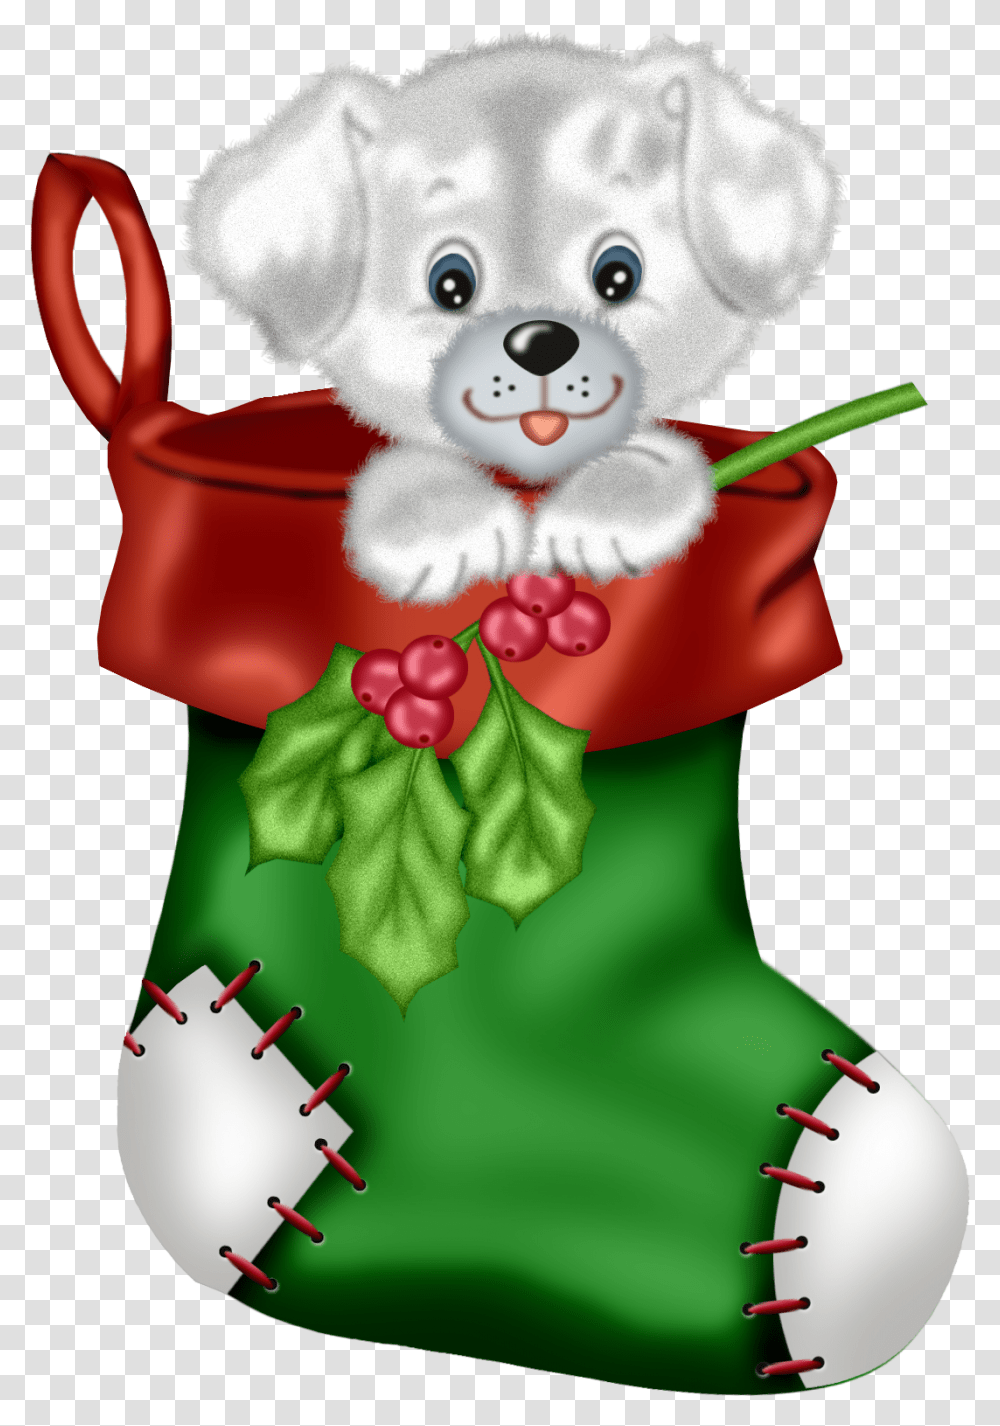 Green Stocking With Puppy Clipart Cute Christmas Stockings Clipart, Gift, Snowman, Winter, Outdoors Transparent Png